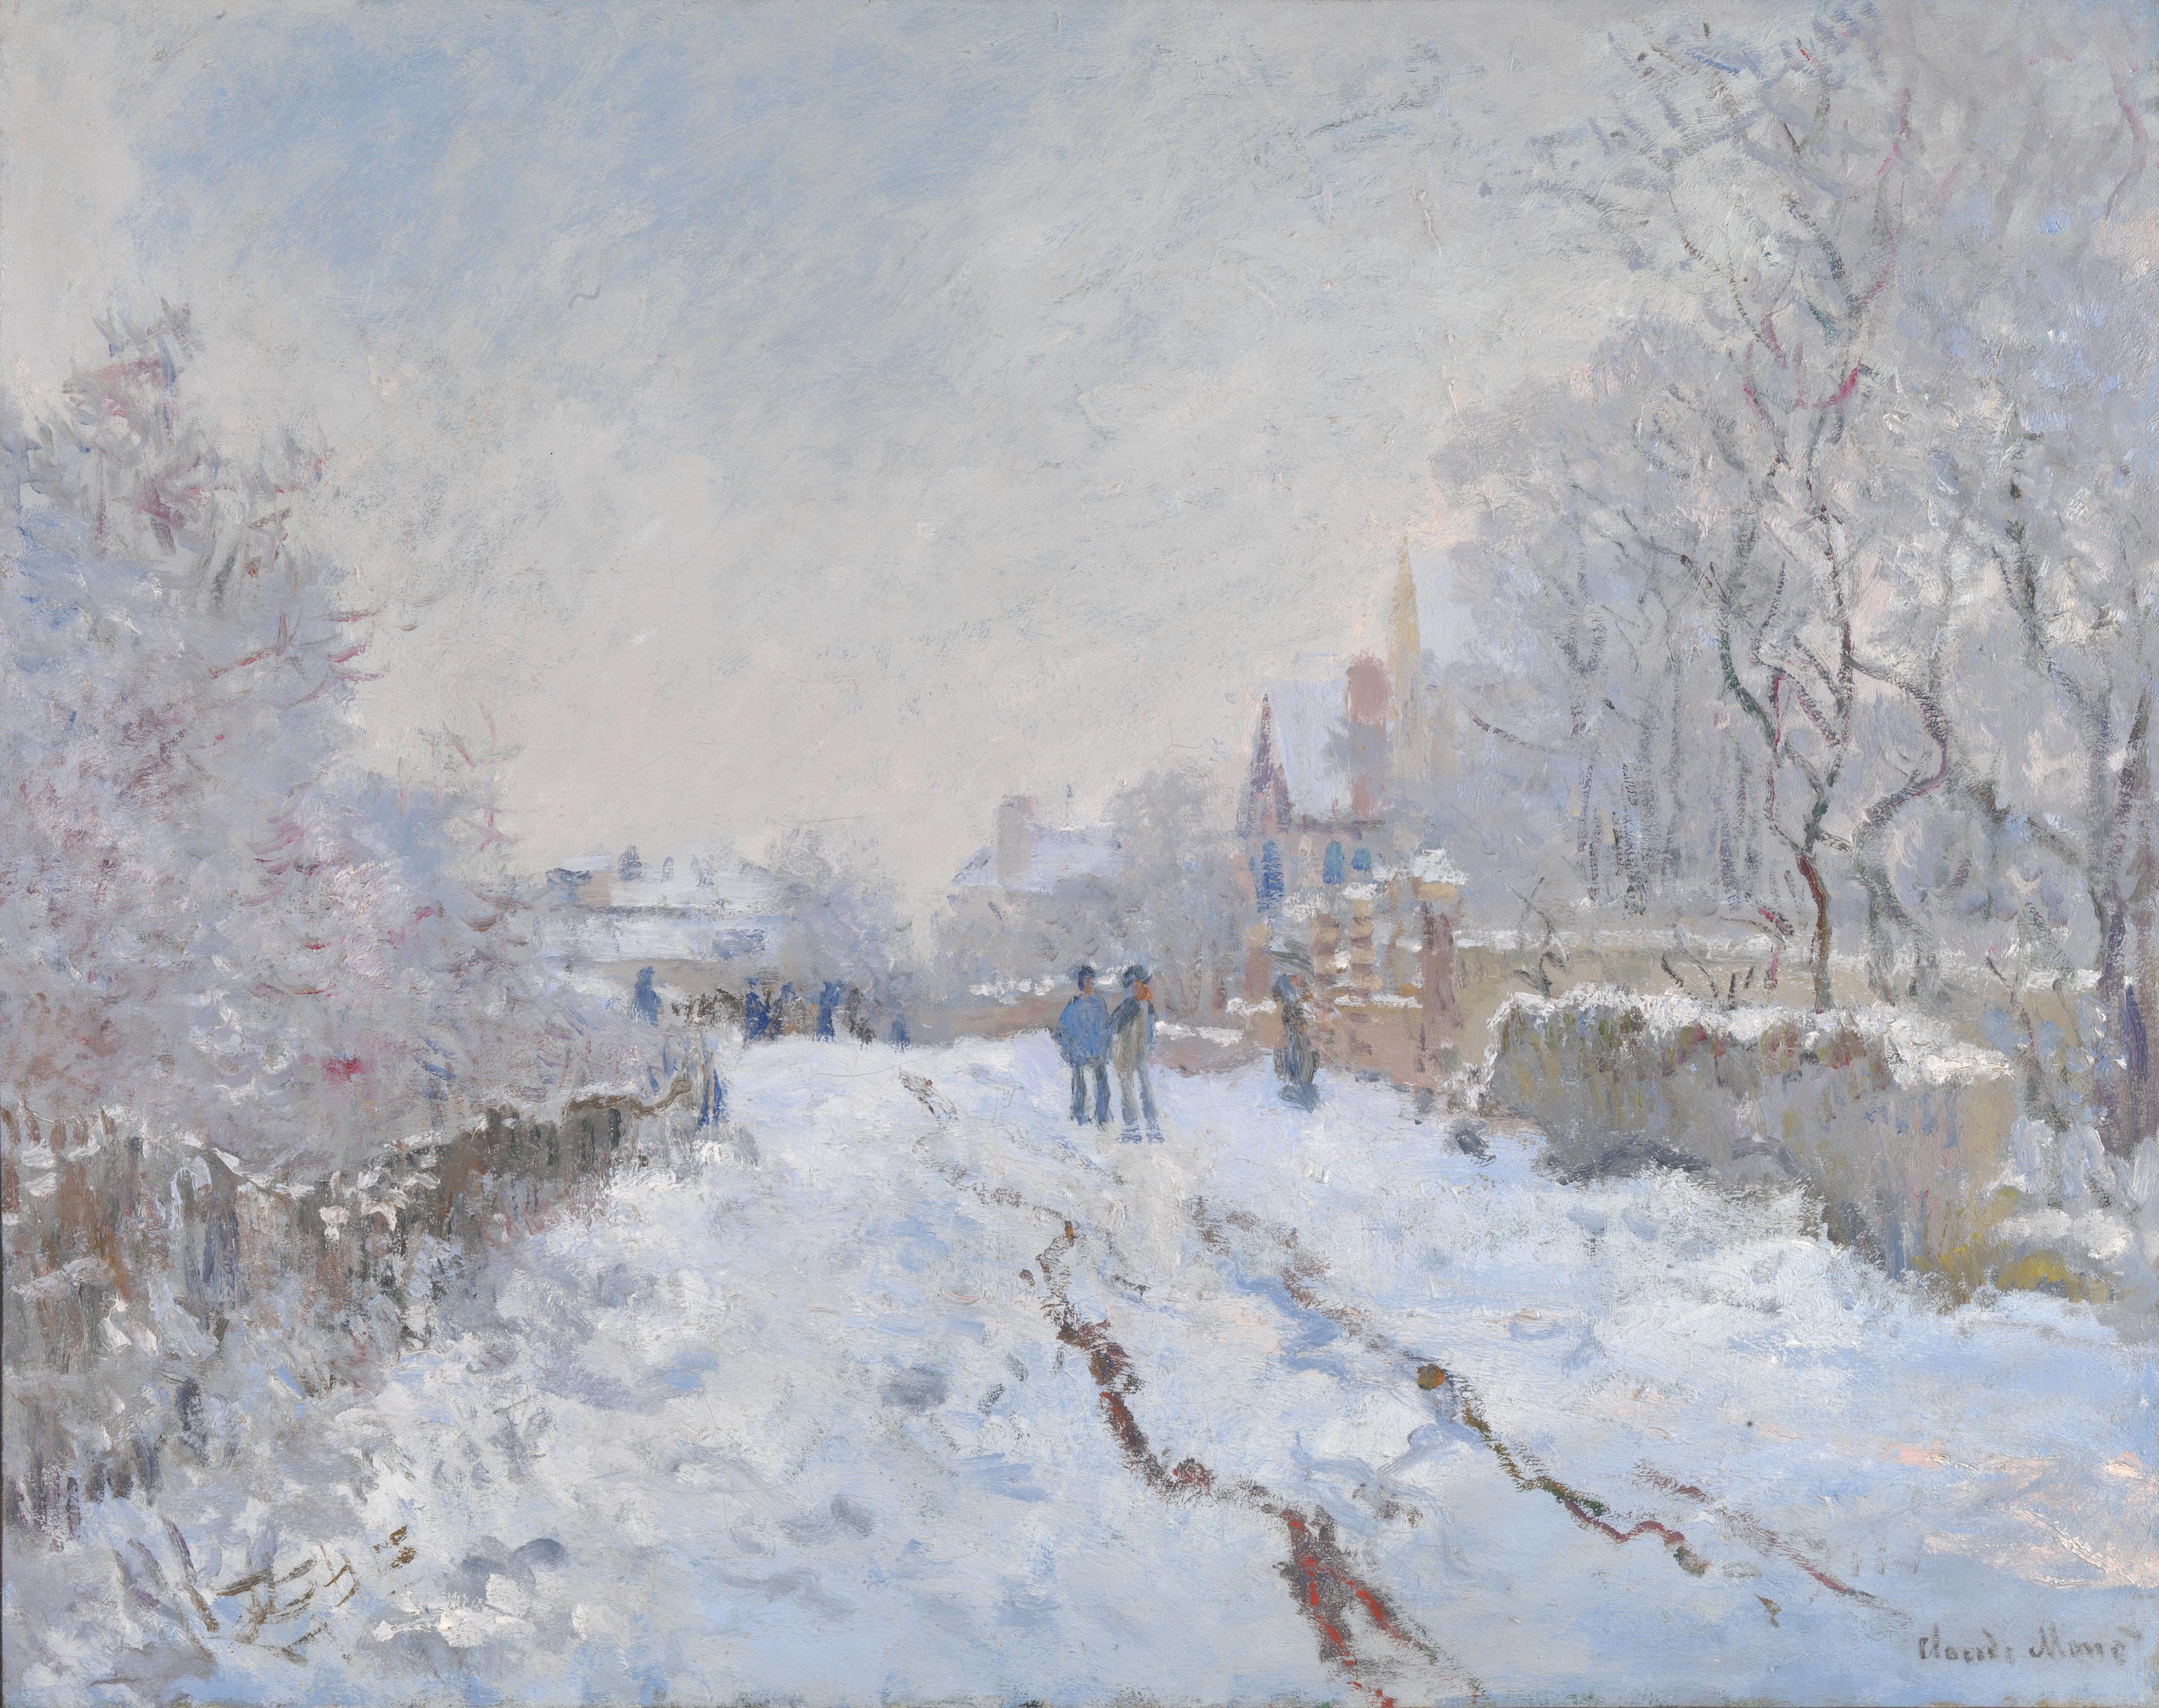 Schnee in Argenteuil by Claude Monet - 1875 - 71.1 x 91.4 cm National Gallery